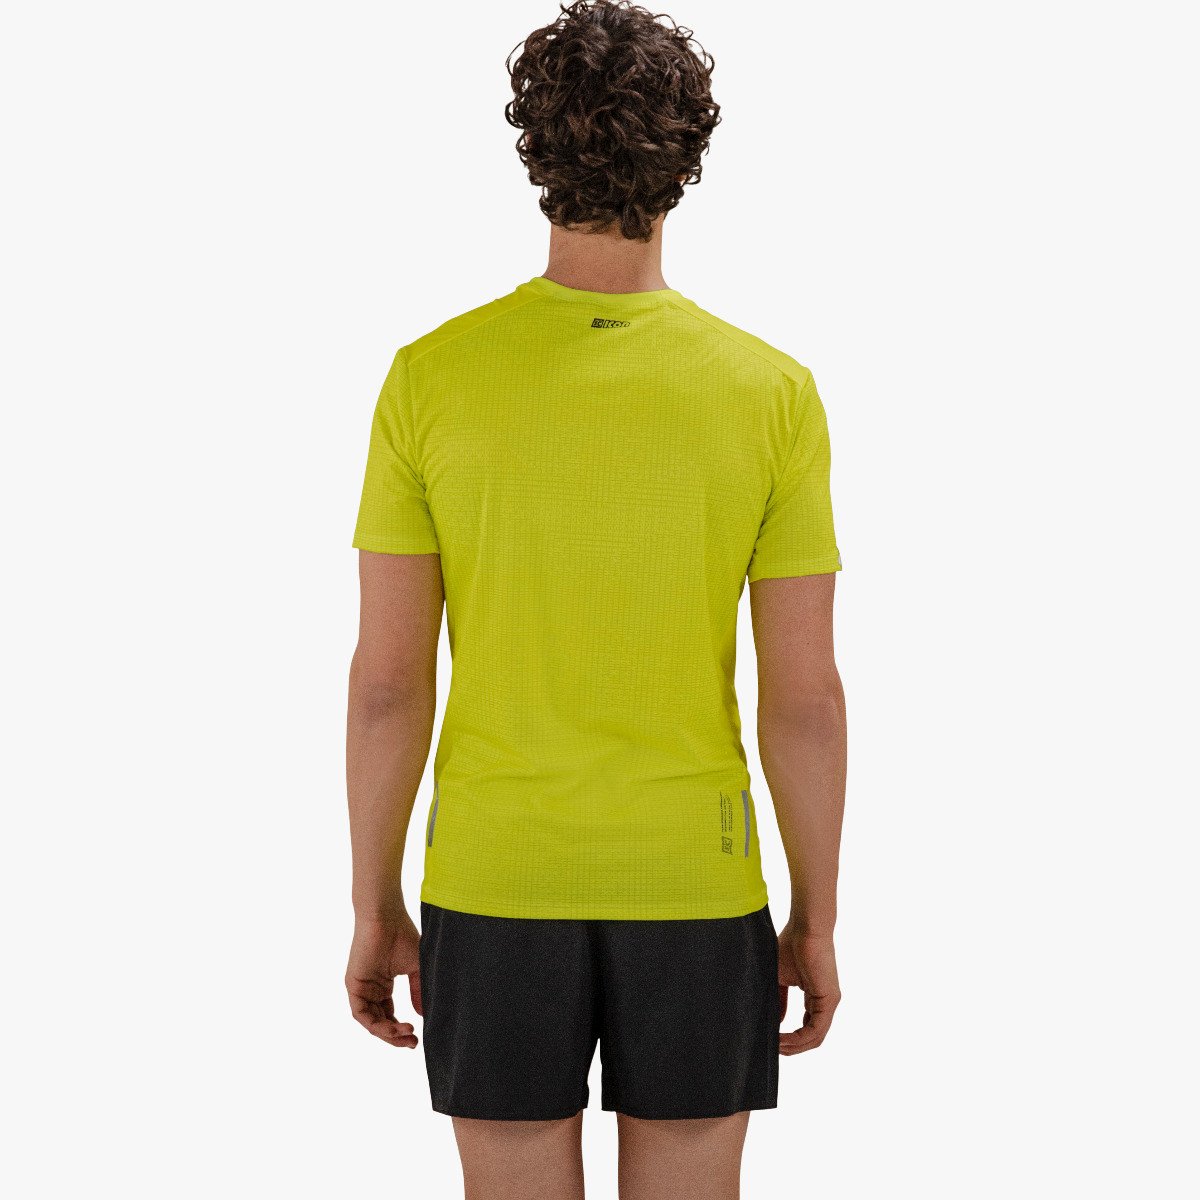 t-shirt technical x-over short sleeve yelllow fluo scicon rt11010